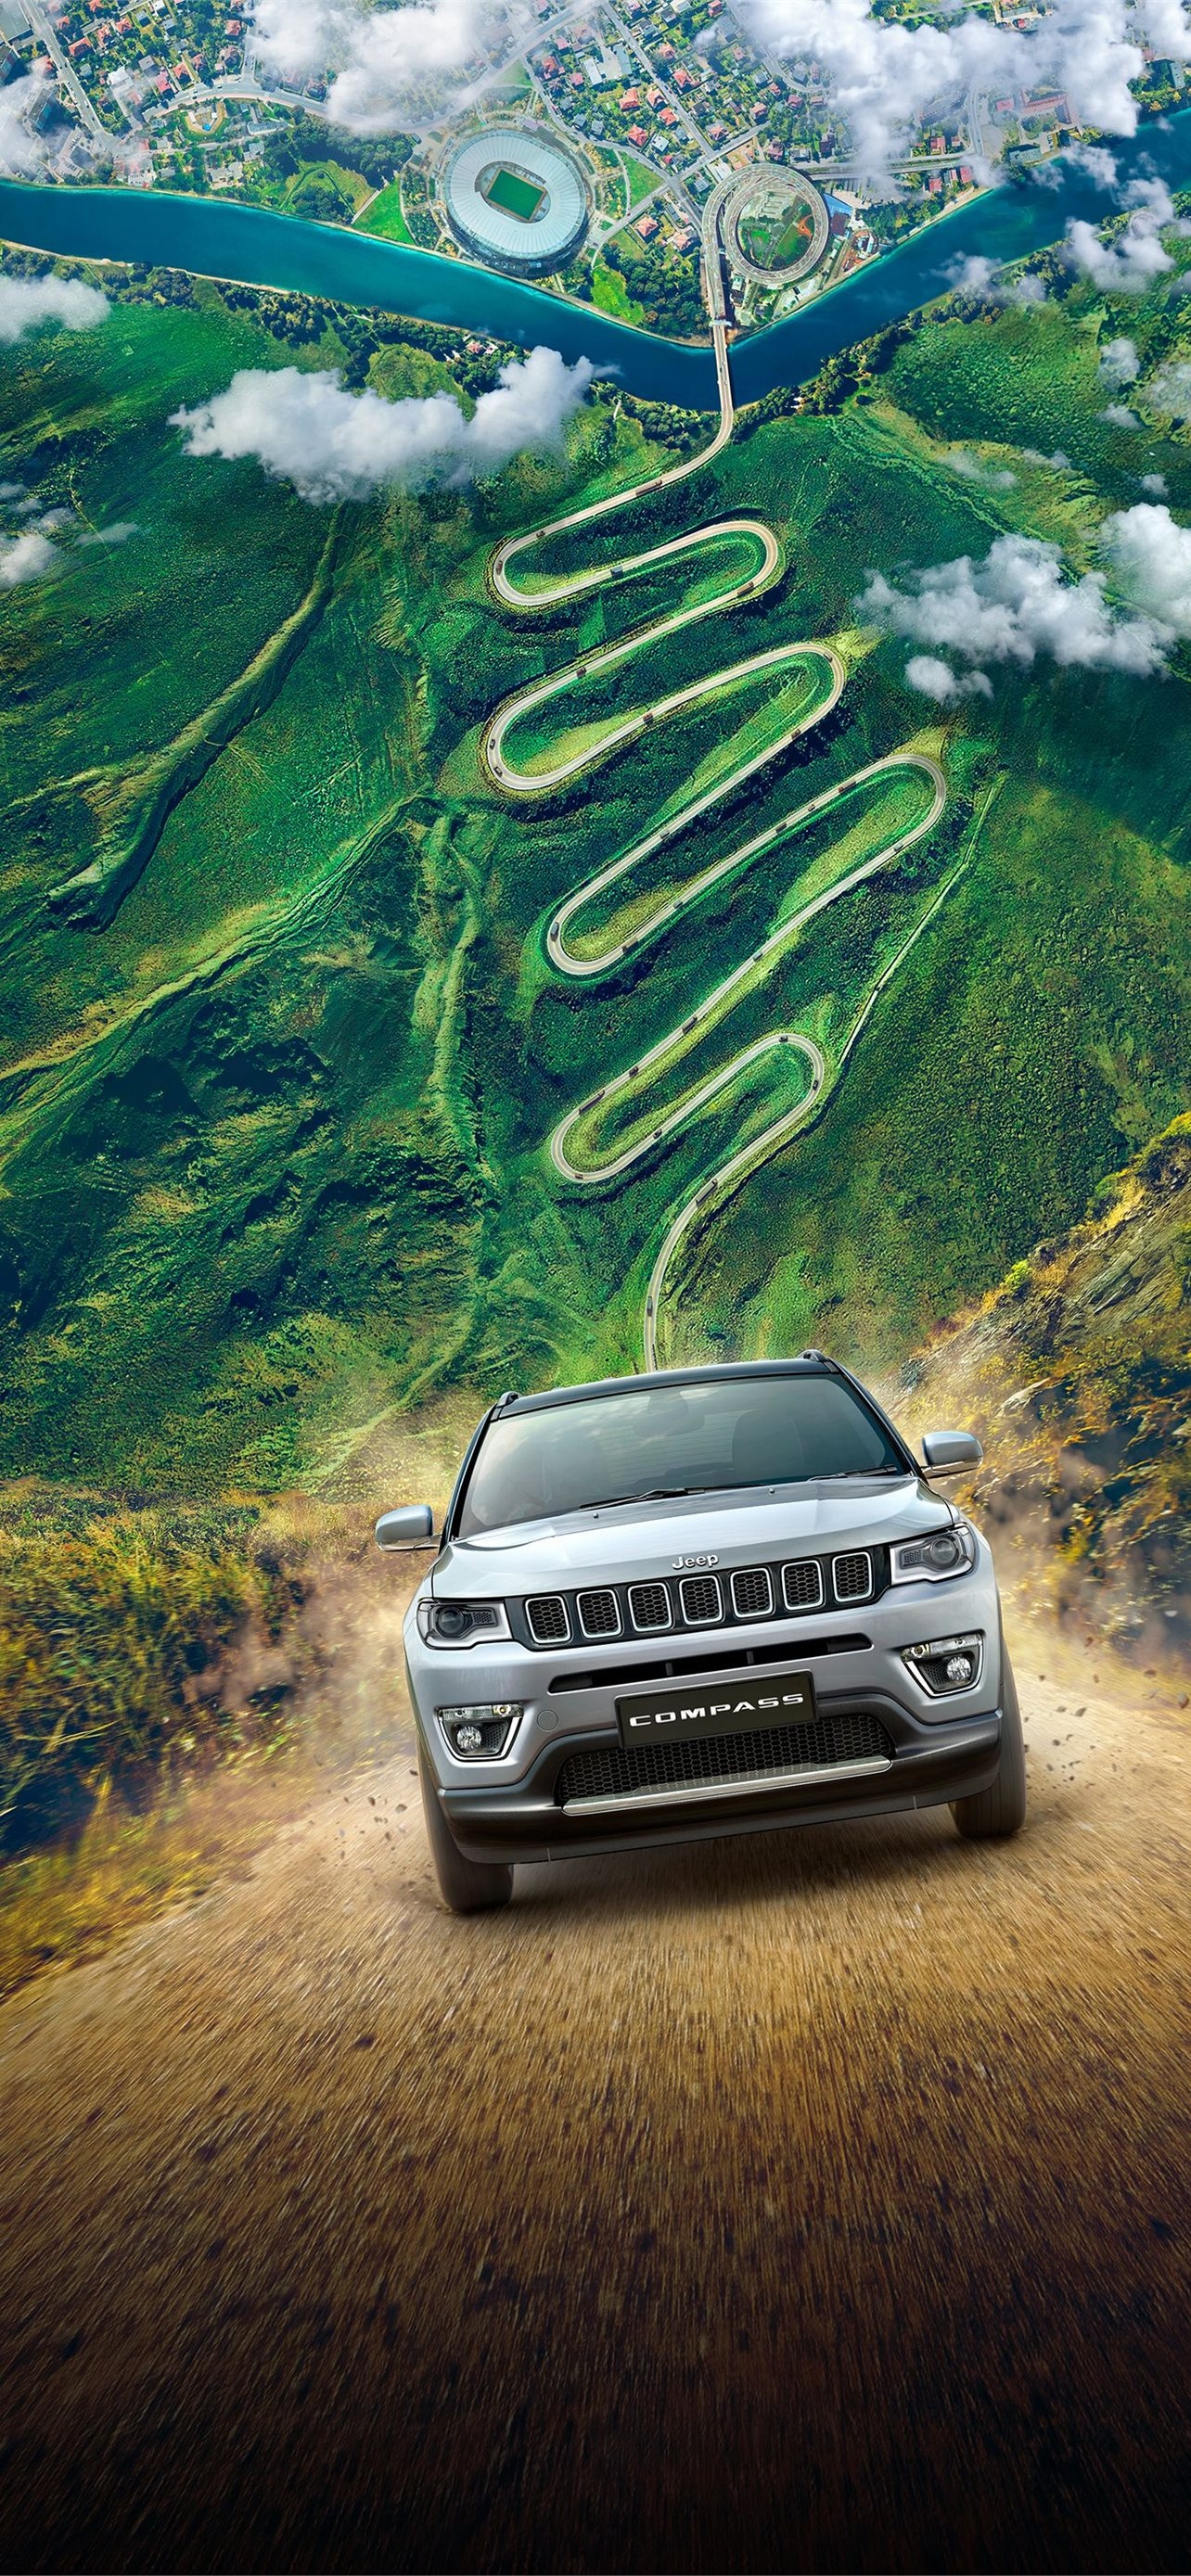 Jeep Compass, Best iPhone wallpapers, High definition images, Stylish look, 1290x2780 HD Handy